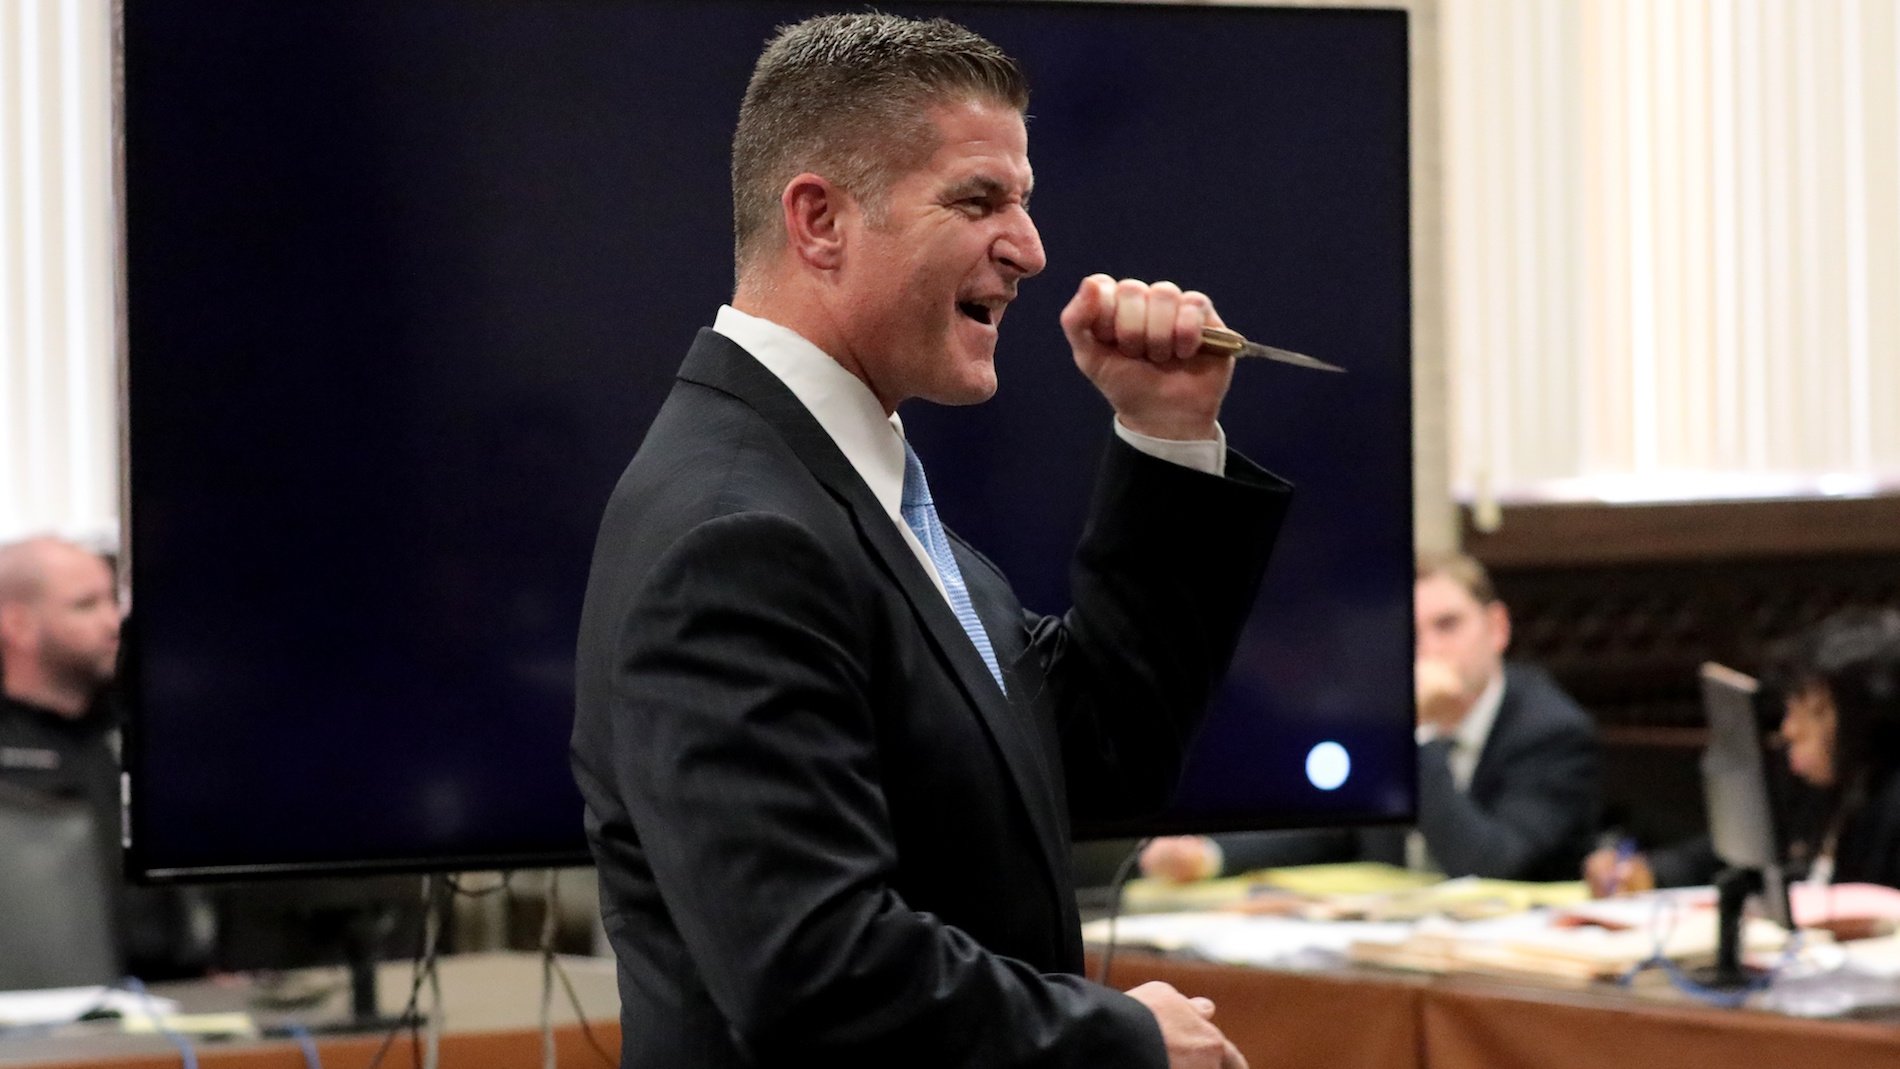 Lead defense attorney Daniel Herbert motions with the 3-inch blade Laquan McDonald carried the night he was fatally shot during opening statements in the trial of Chicago police Officer Jason Van Dyke at the Leighton Criminal Court Building on Sept. 17, 2018. (Antonio Perez / Chicago Tribune / Pool)